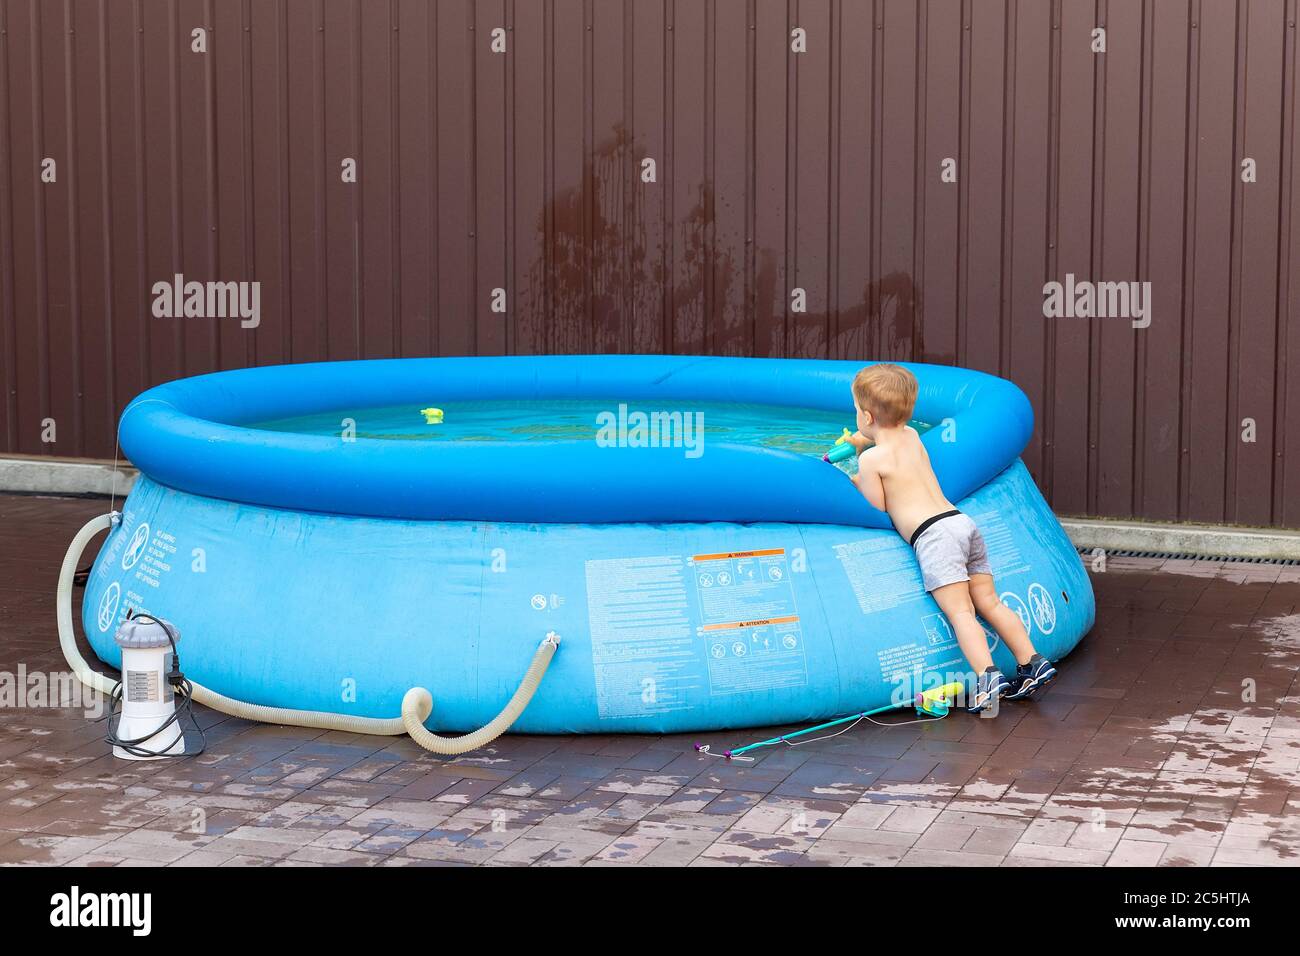 Cute little adorable caucasian blond toddler boy looking into inflatable blue pool enjoy playing with toy fishing rod at home yard on hot summer day Stock Photo